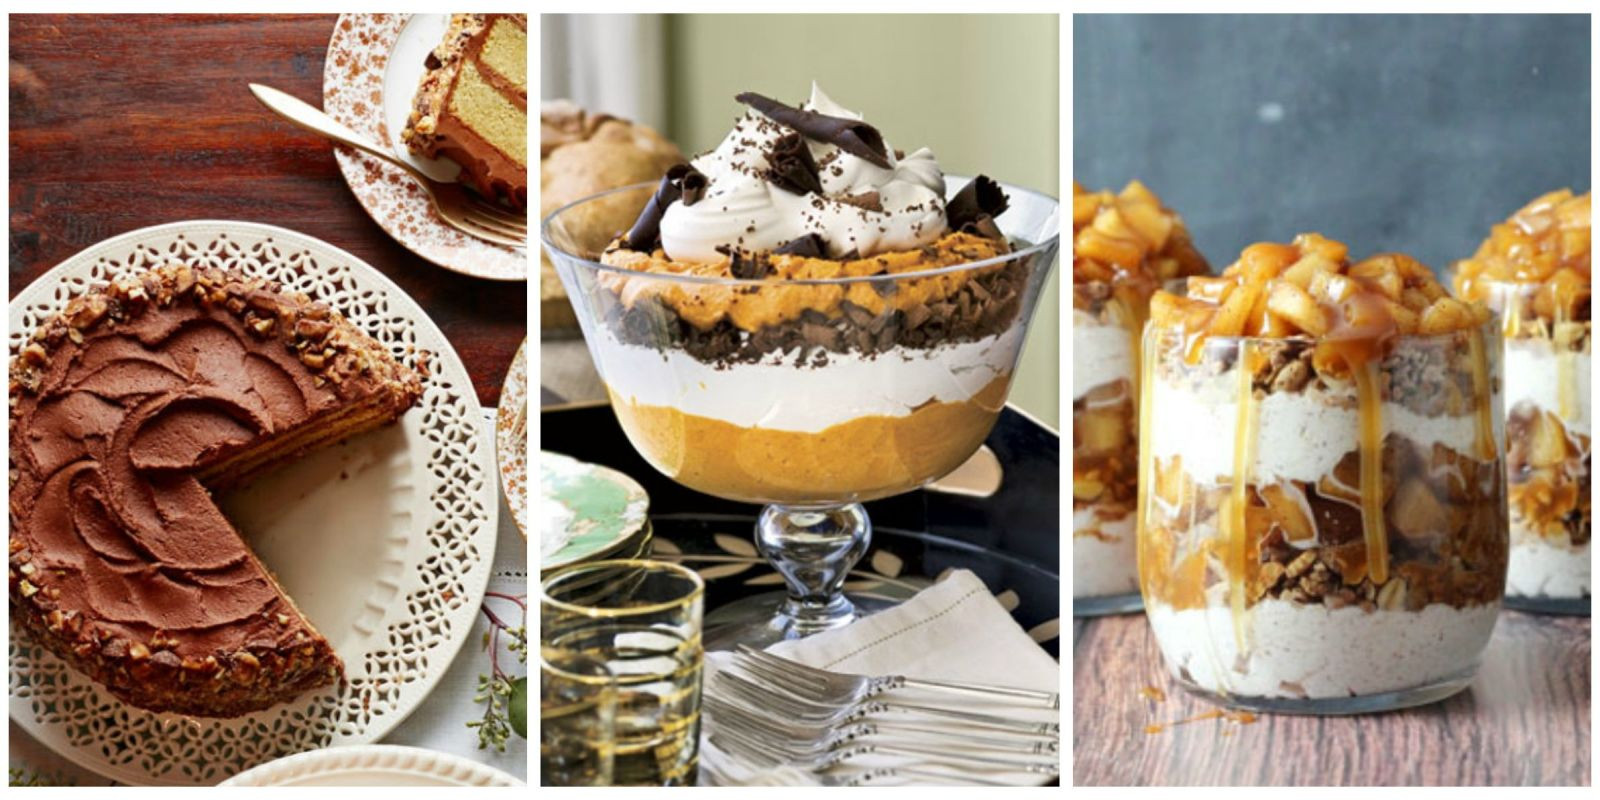 Best Desserts For Thanksgiving
 40 Easy Thanksgiving Desserts Recipes Best Ideas for